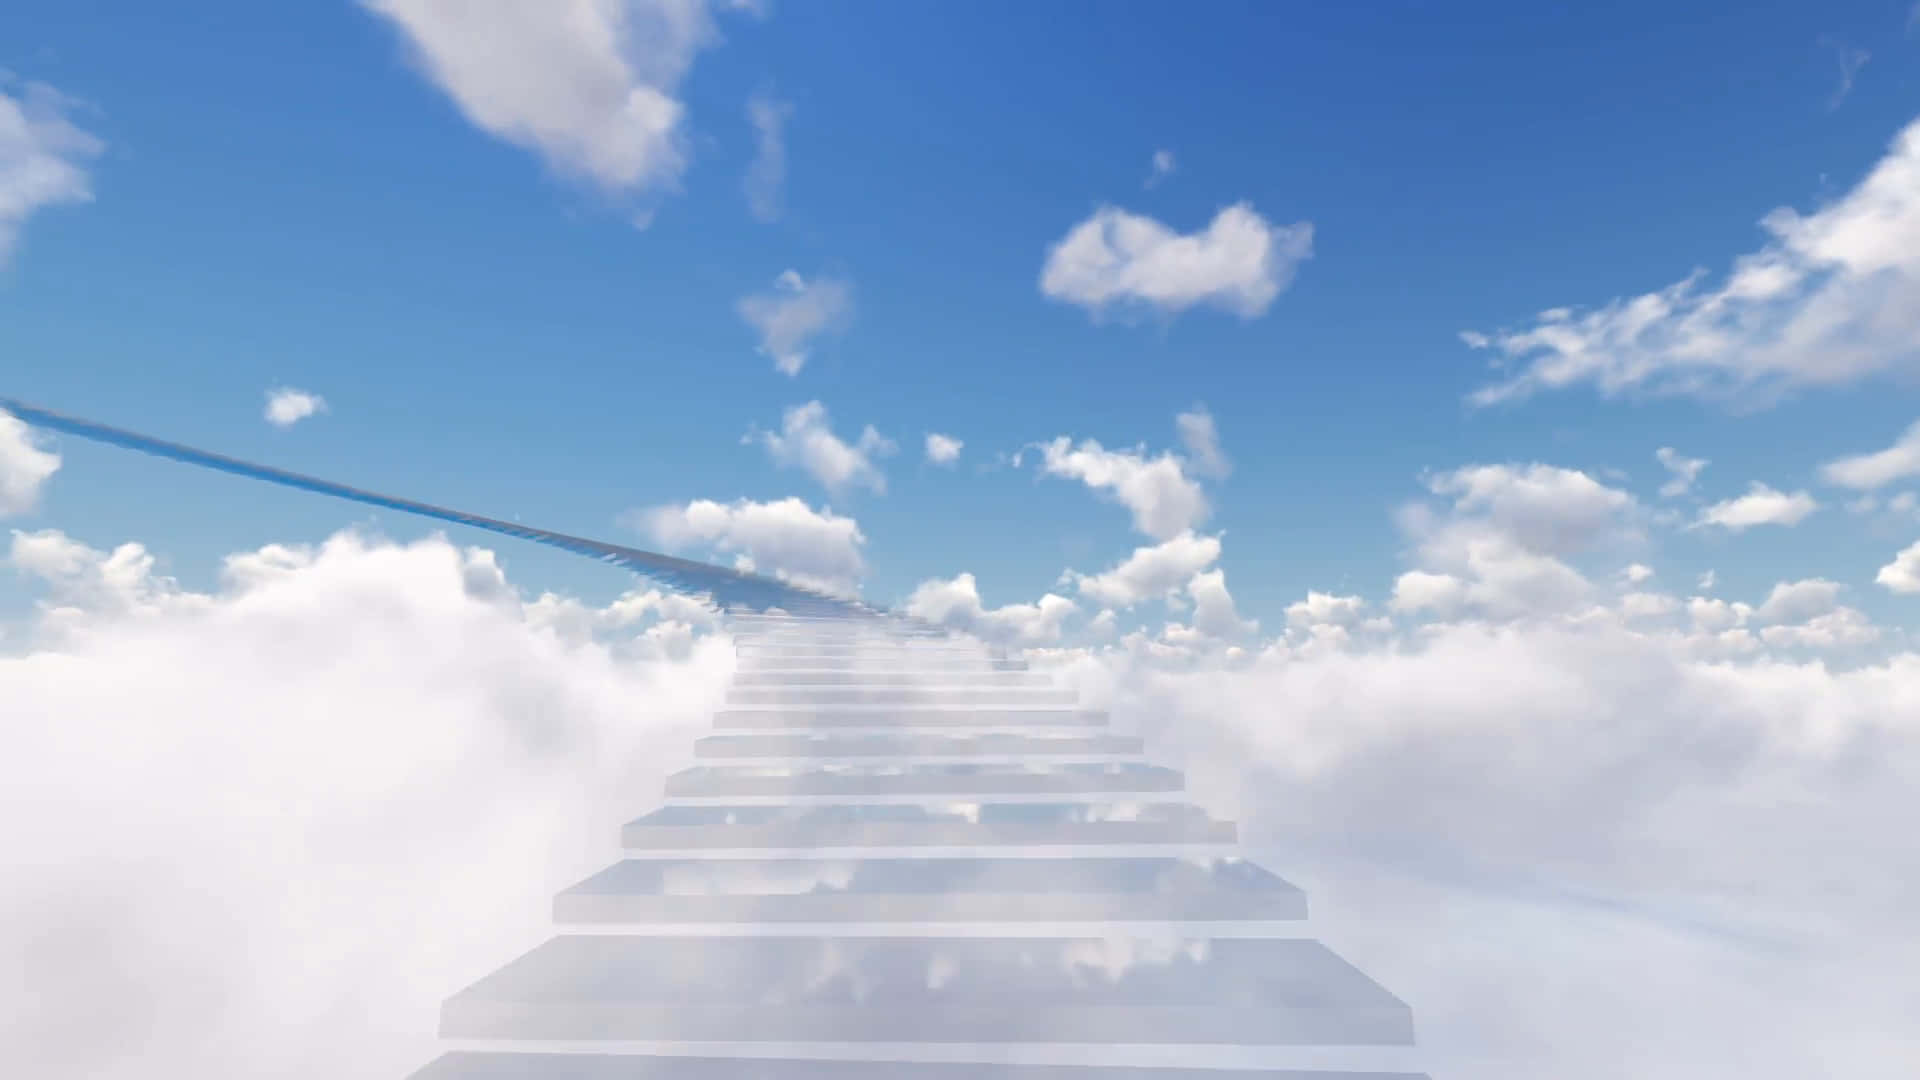 “taking The Path Less Traveled - Stairway To Heaven” Background